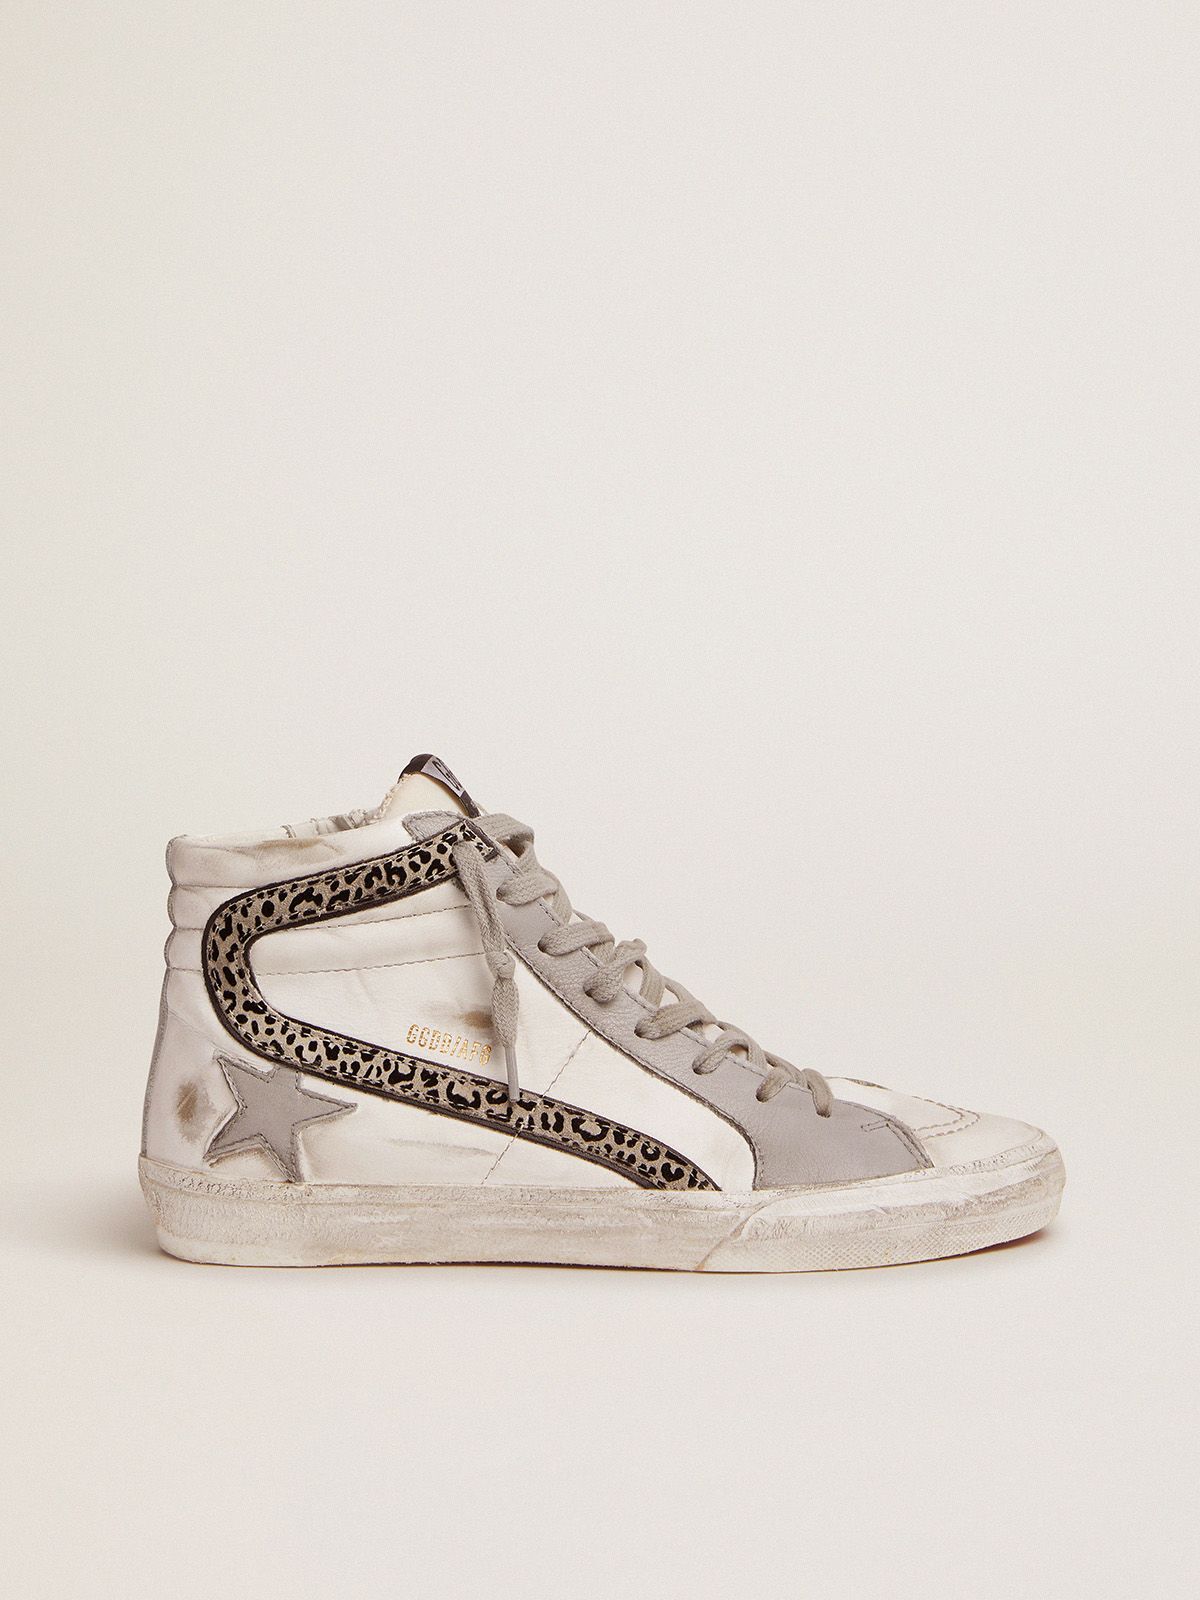 Slide sneakers with white and gray leather upper and leopard-print suede flash | 